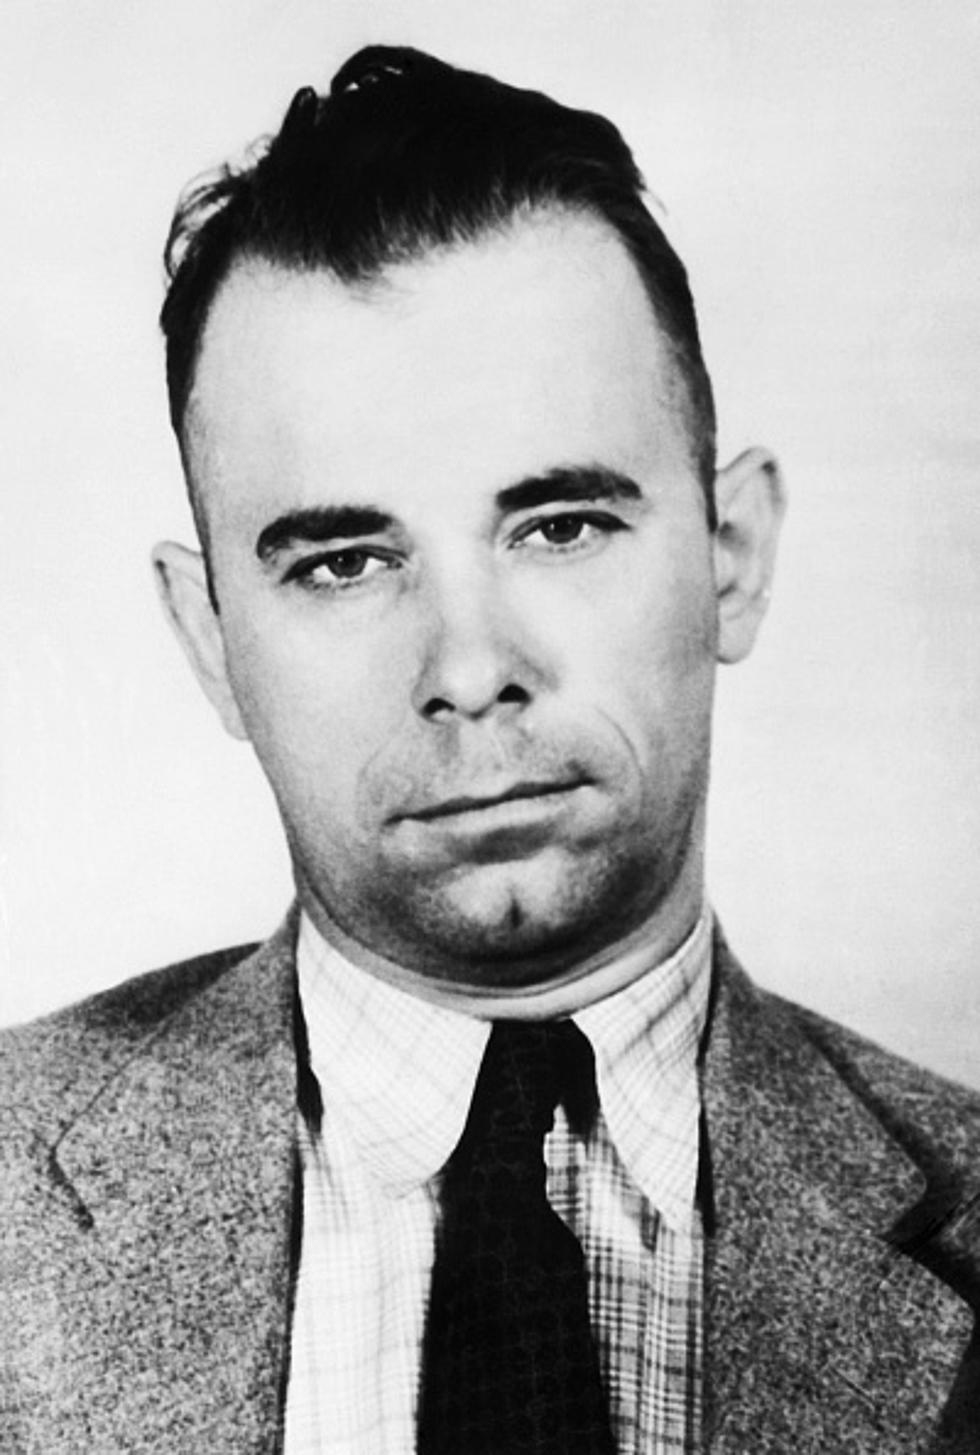 Indiana Is Going To Exhume John Dillinger’s Body